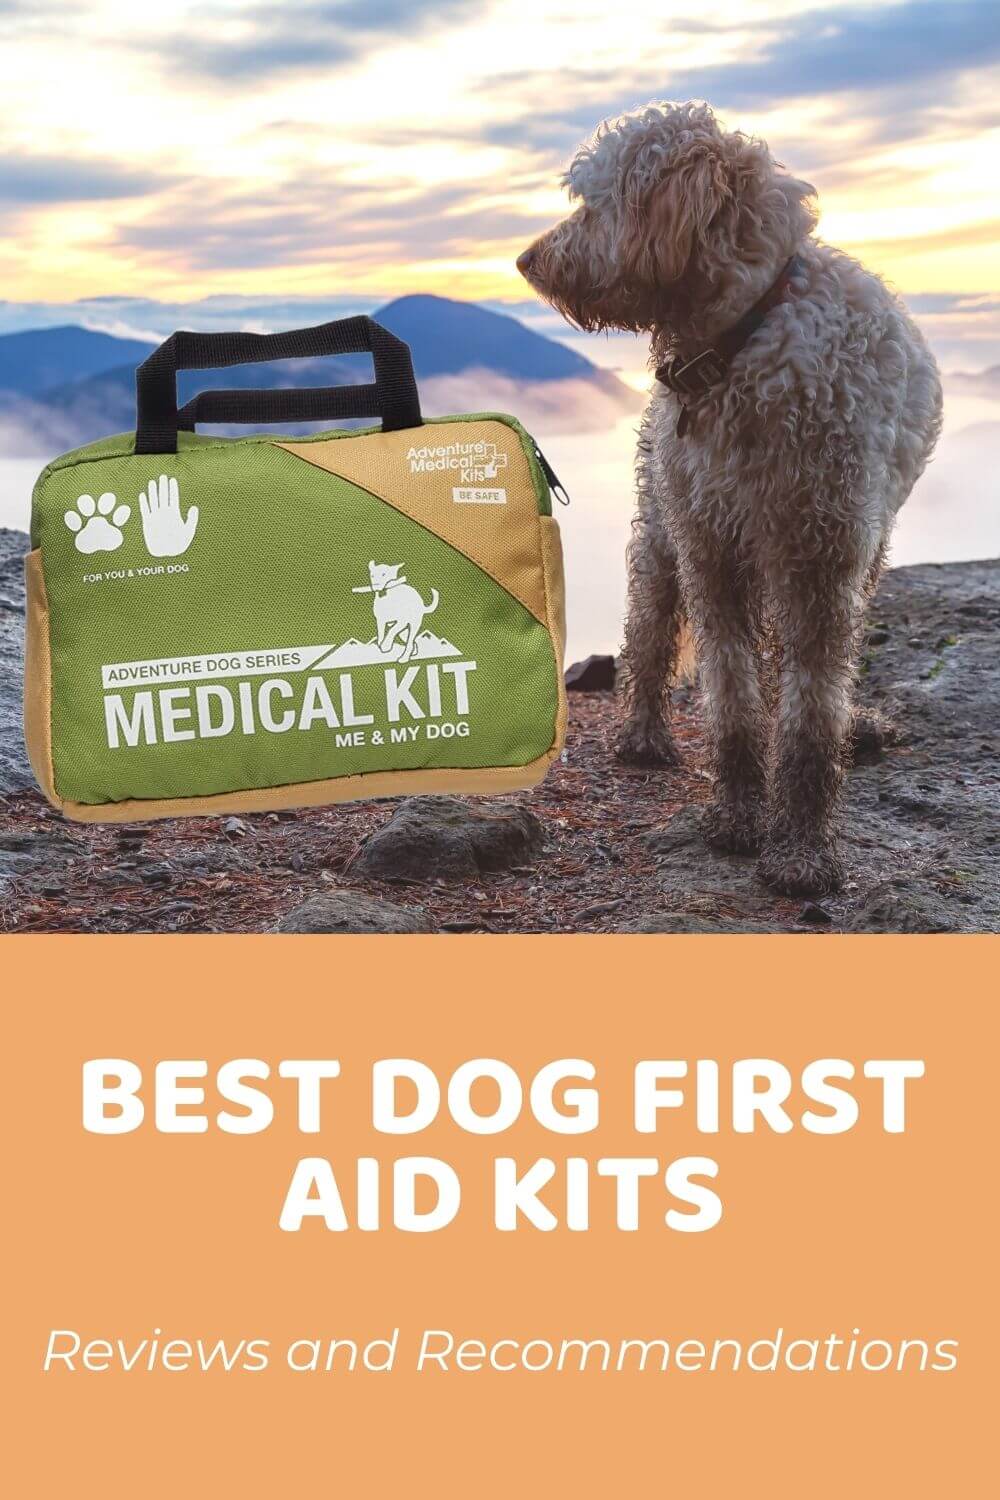 Best Dog First Aid Kit Reviews and Recommendations